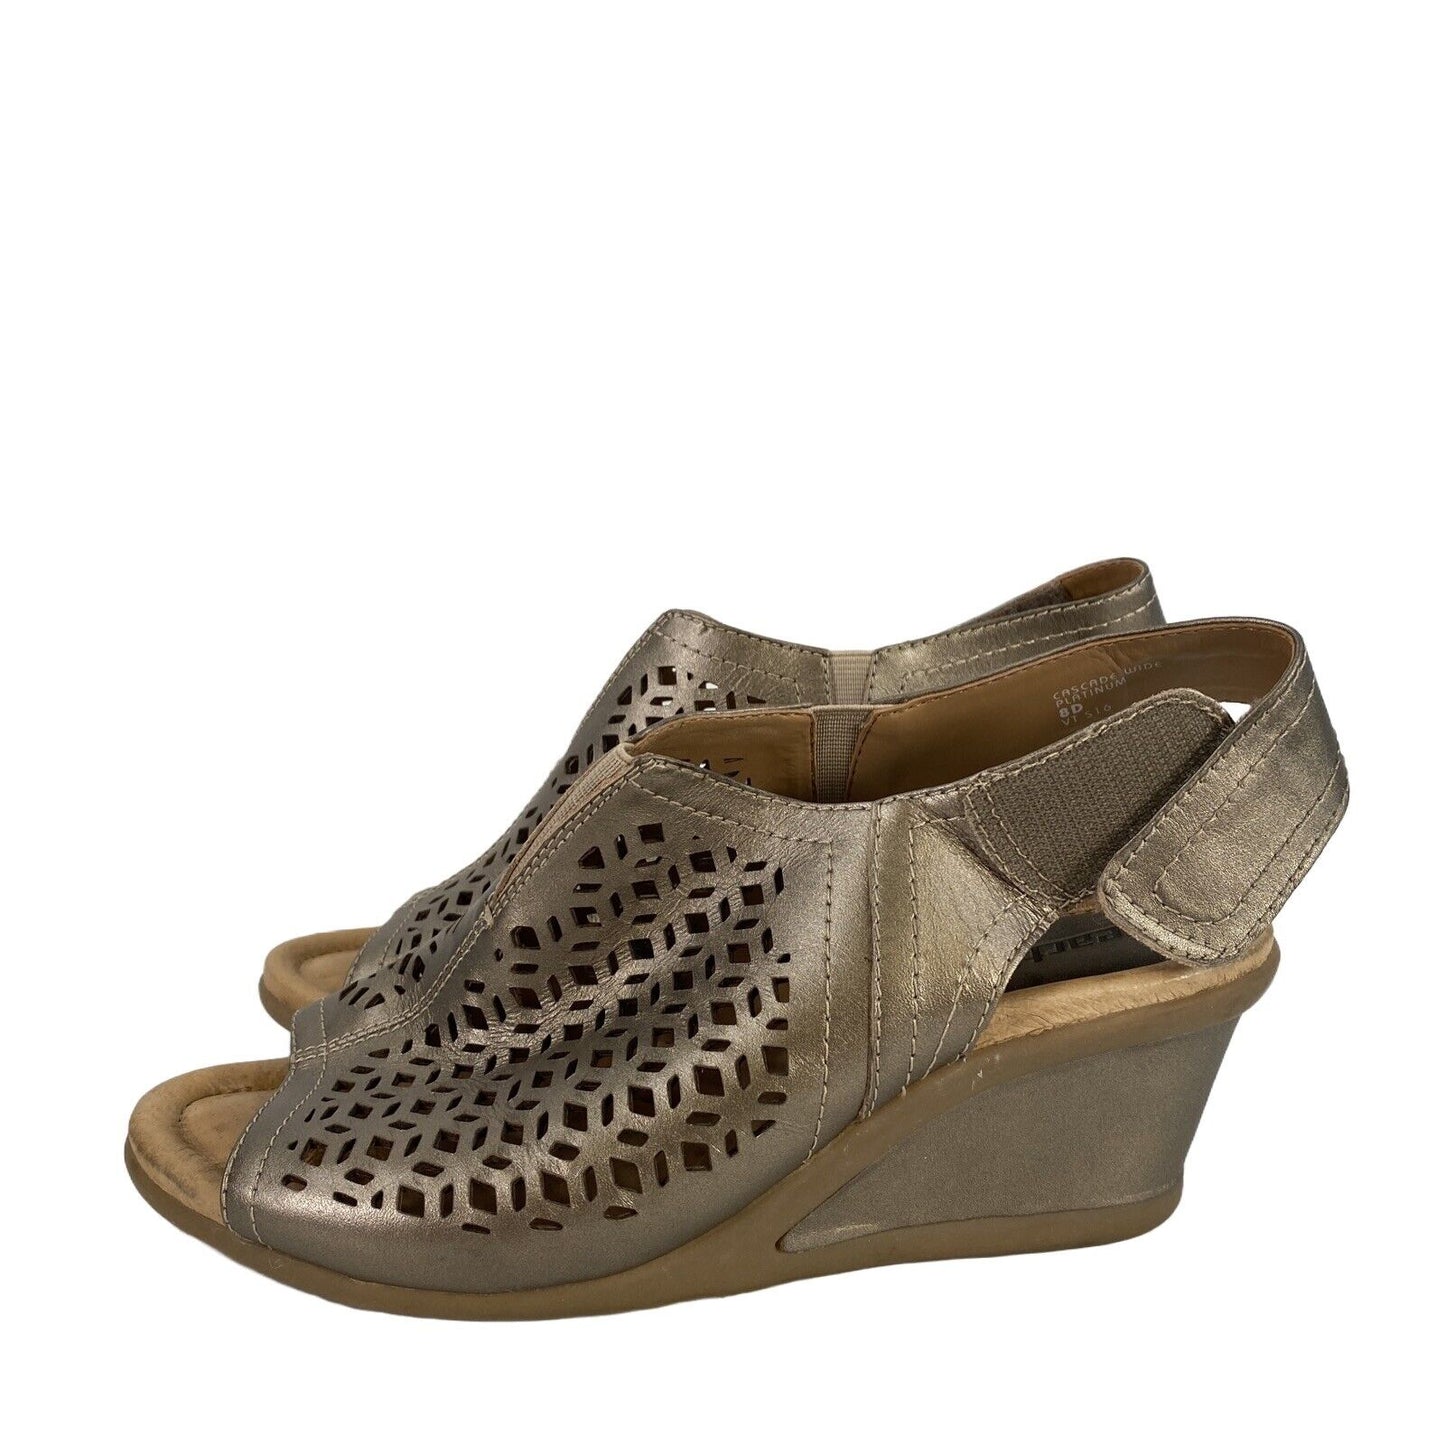 Earth Women's Gold Synthetic Cascade Perforated Wedge Sandals - 8 D